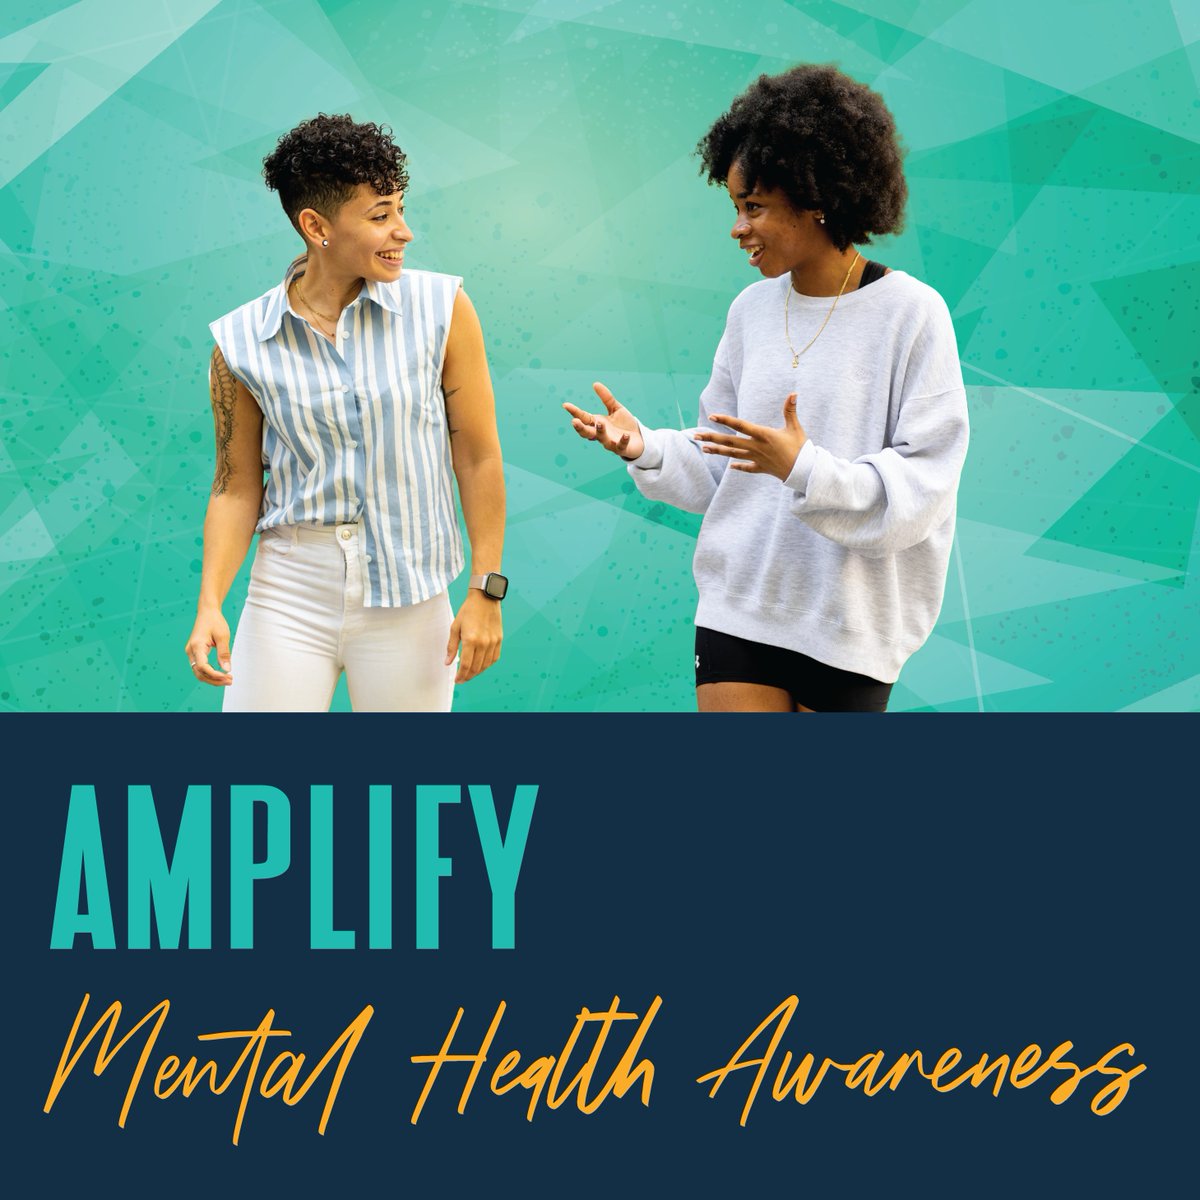 Young people today are facing an unprecedented mental health crisis. #MentalHealthActionDay is a good reminder to check in with the young people in your life, listen without judgment, and offer unconditional support: bit.ly/3nSkA7m #MentoringAmplifies